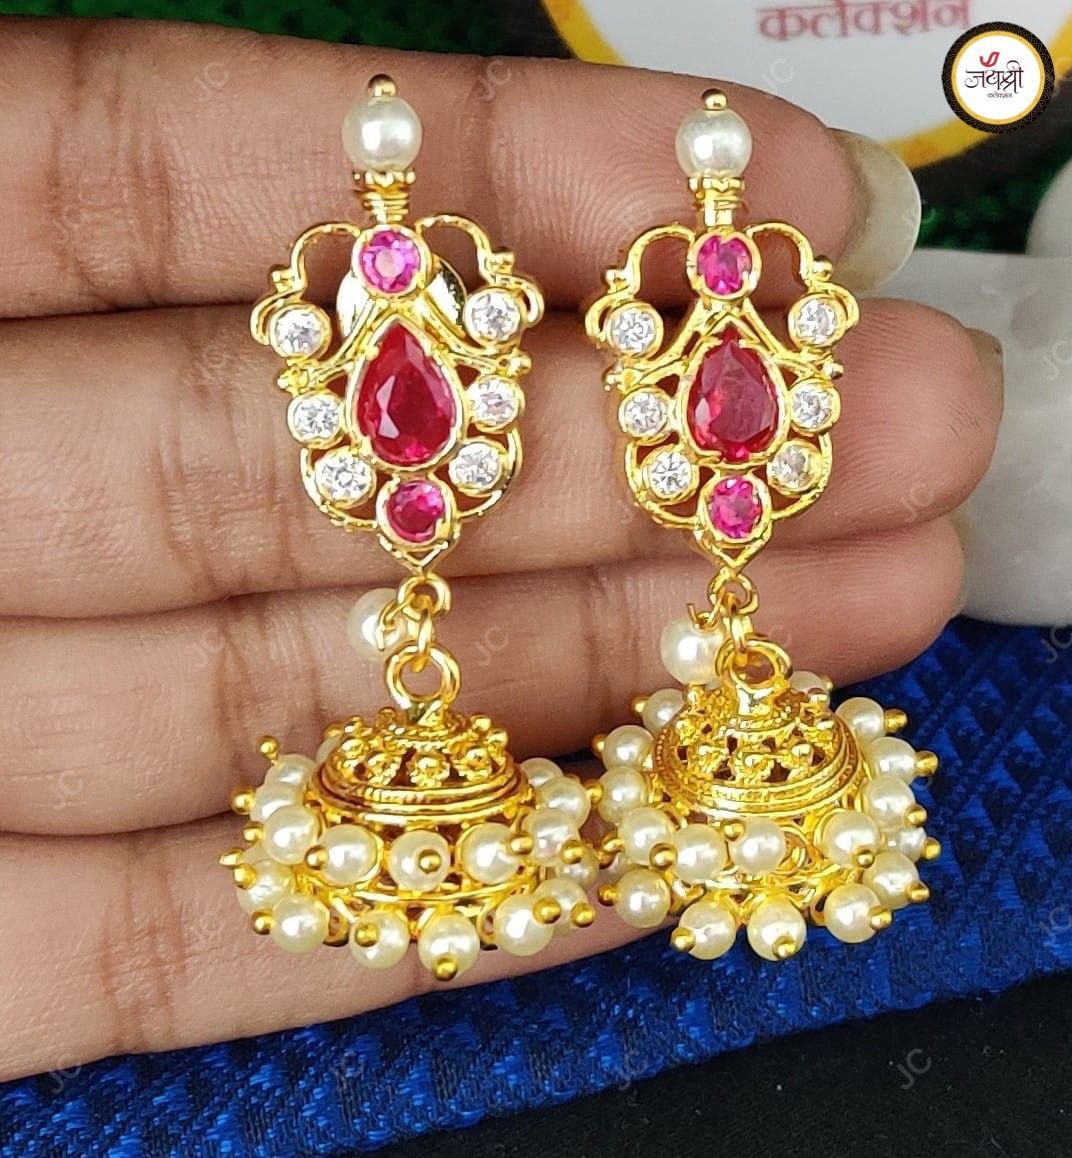 Buy Yellow Chimes Silver and Red Silver-Plated Oxidised Moti Studded Jhumka  Earrings online